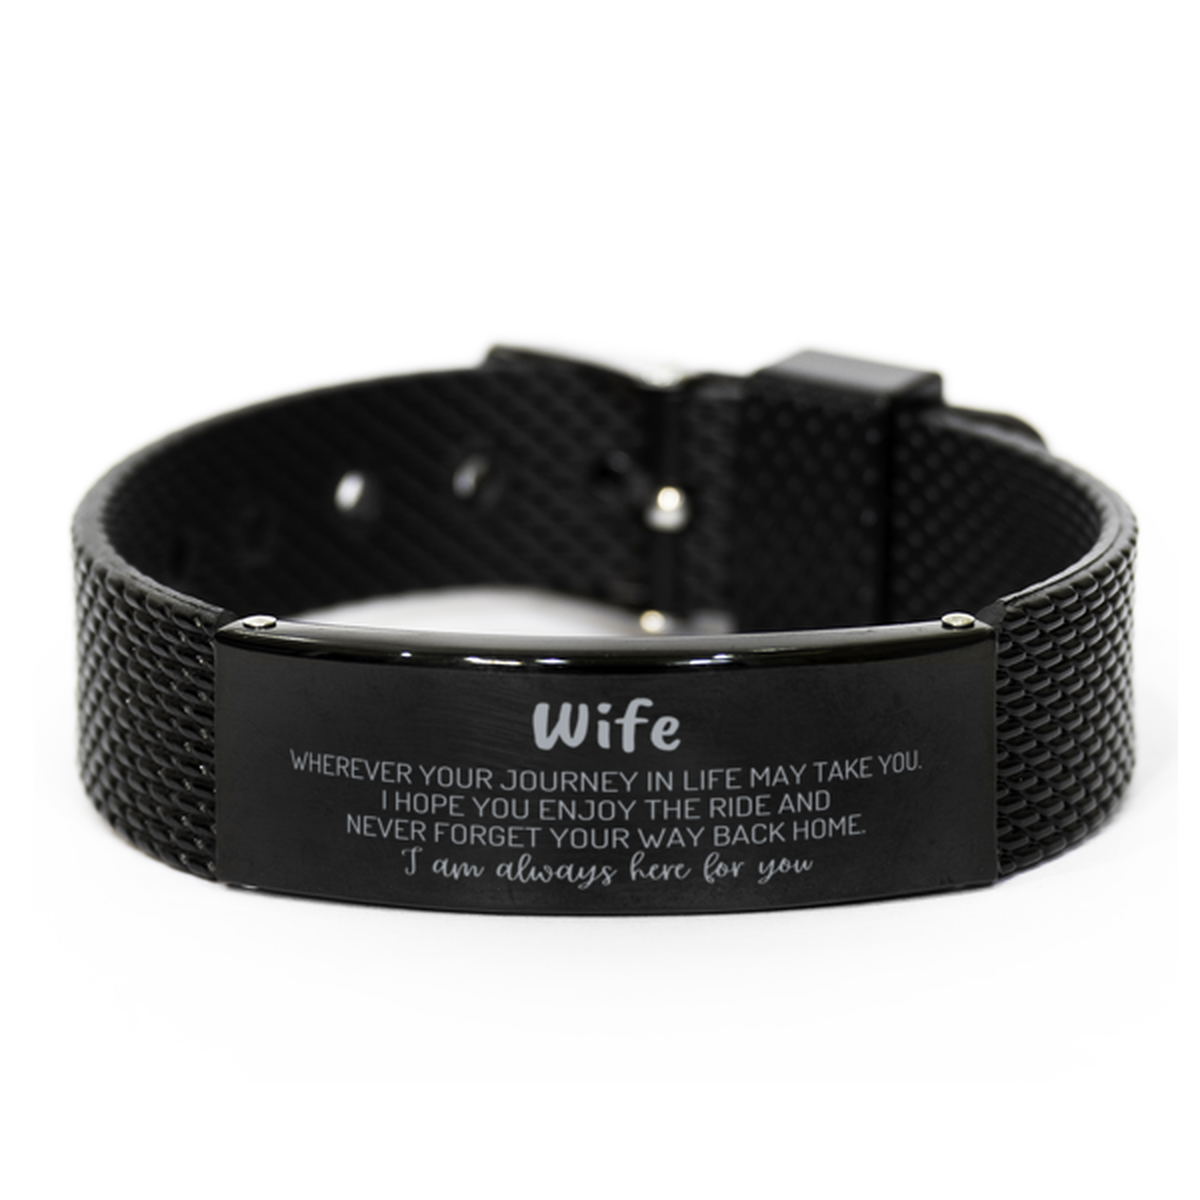 Wife wherever your journey in life may take you, I am always here for you Wife Black Shark Mesh Bracelet, Awesome Christmas Gifts For Wife, Wife Birthday Gifts for Men Women Family Loved One